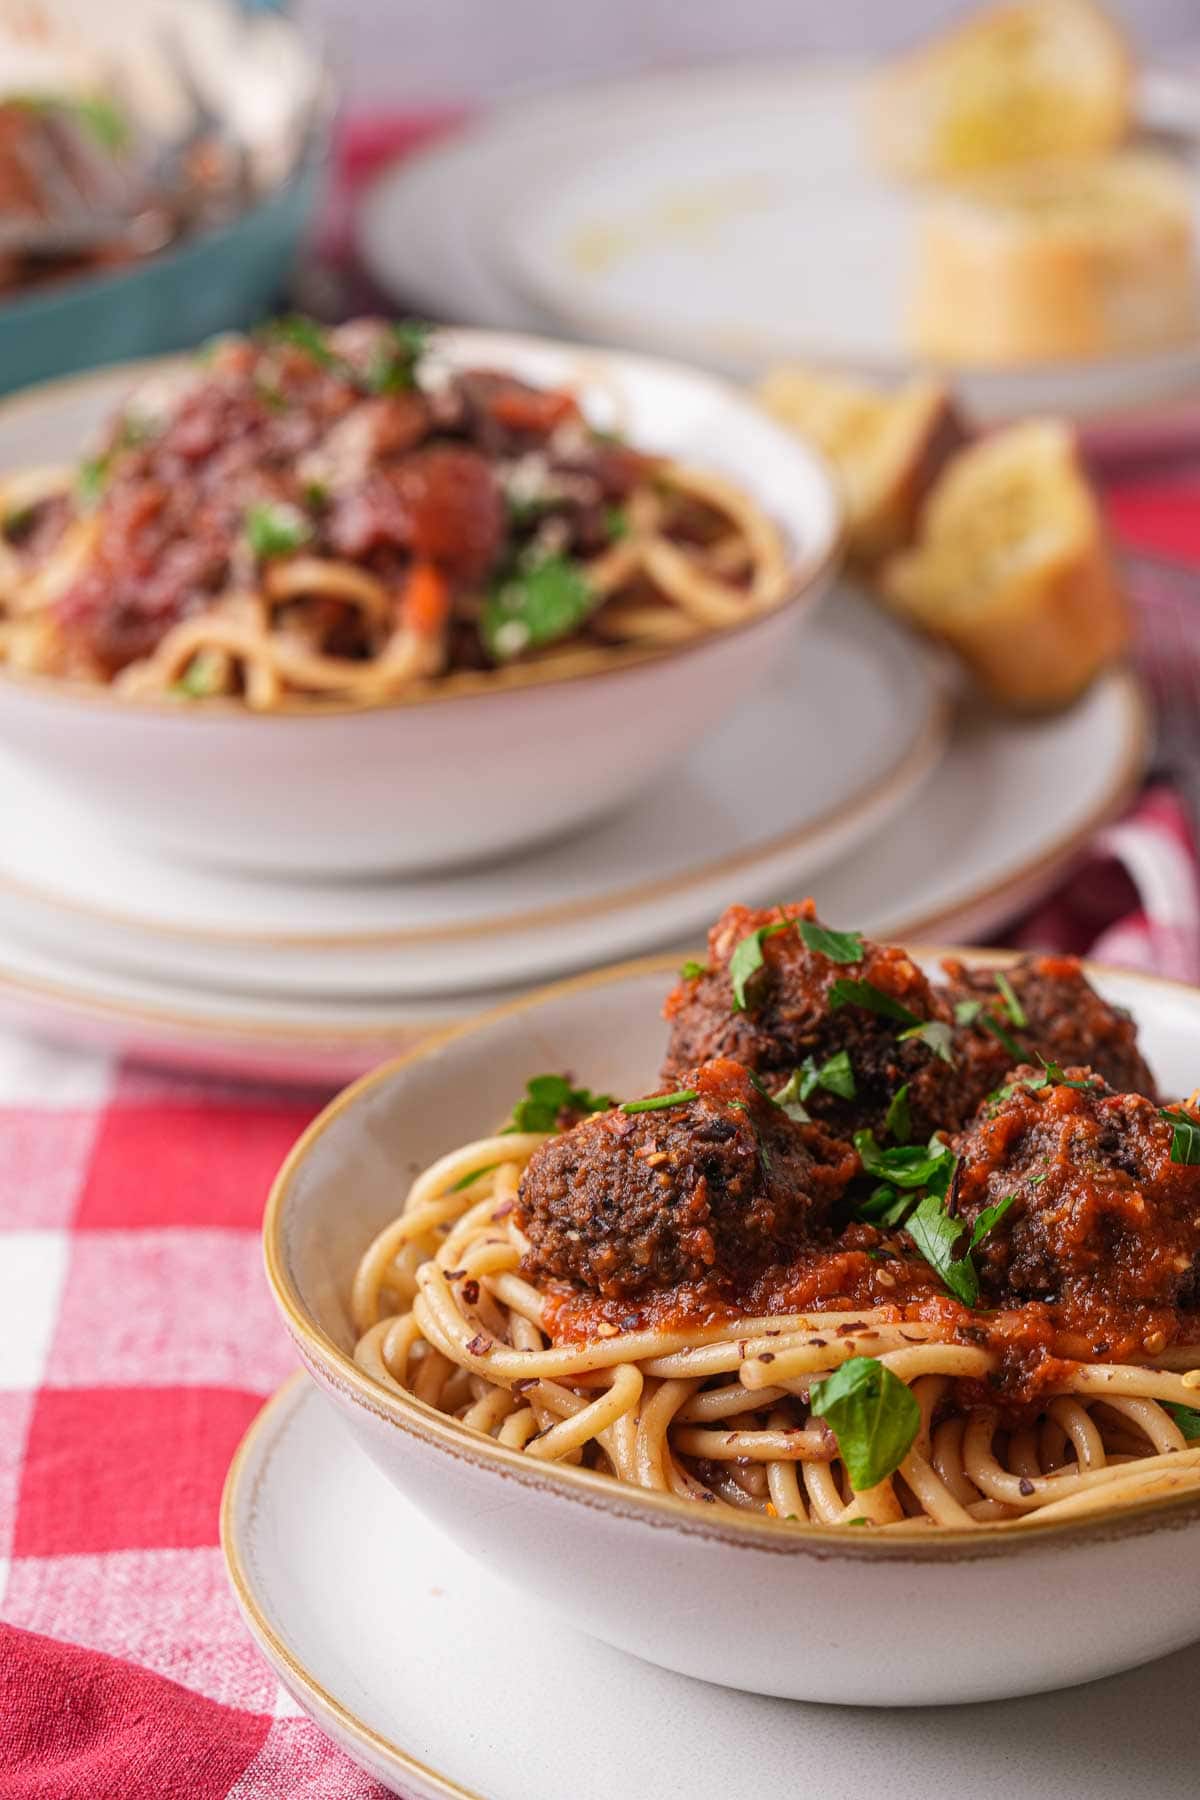 Two bowls of spaghetti with vegan meatballs on a table.